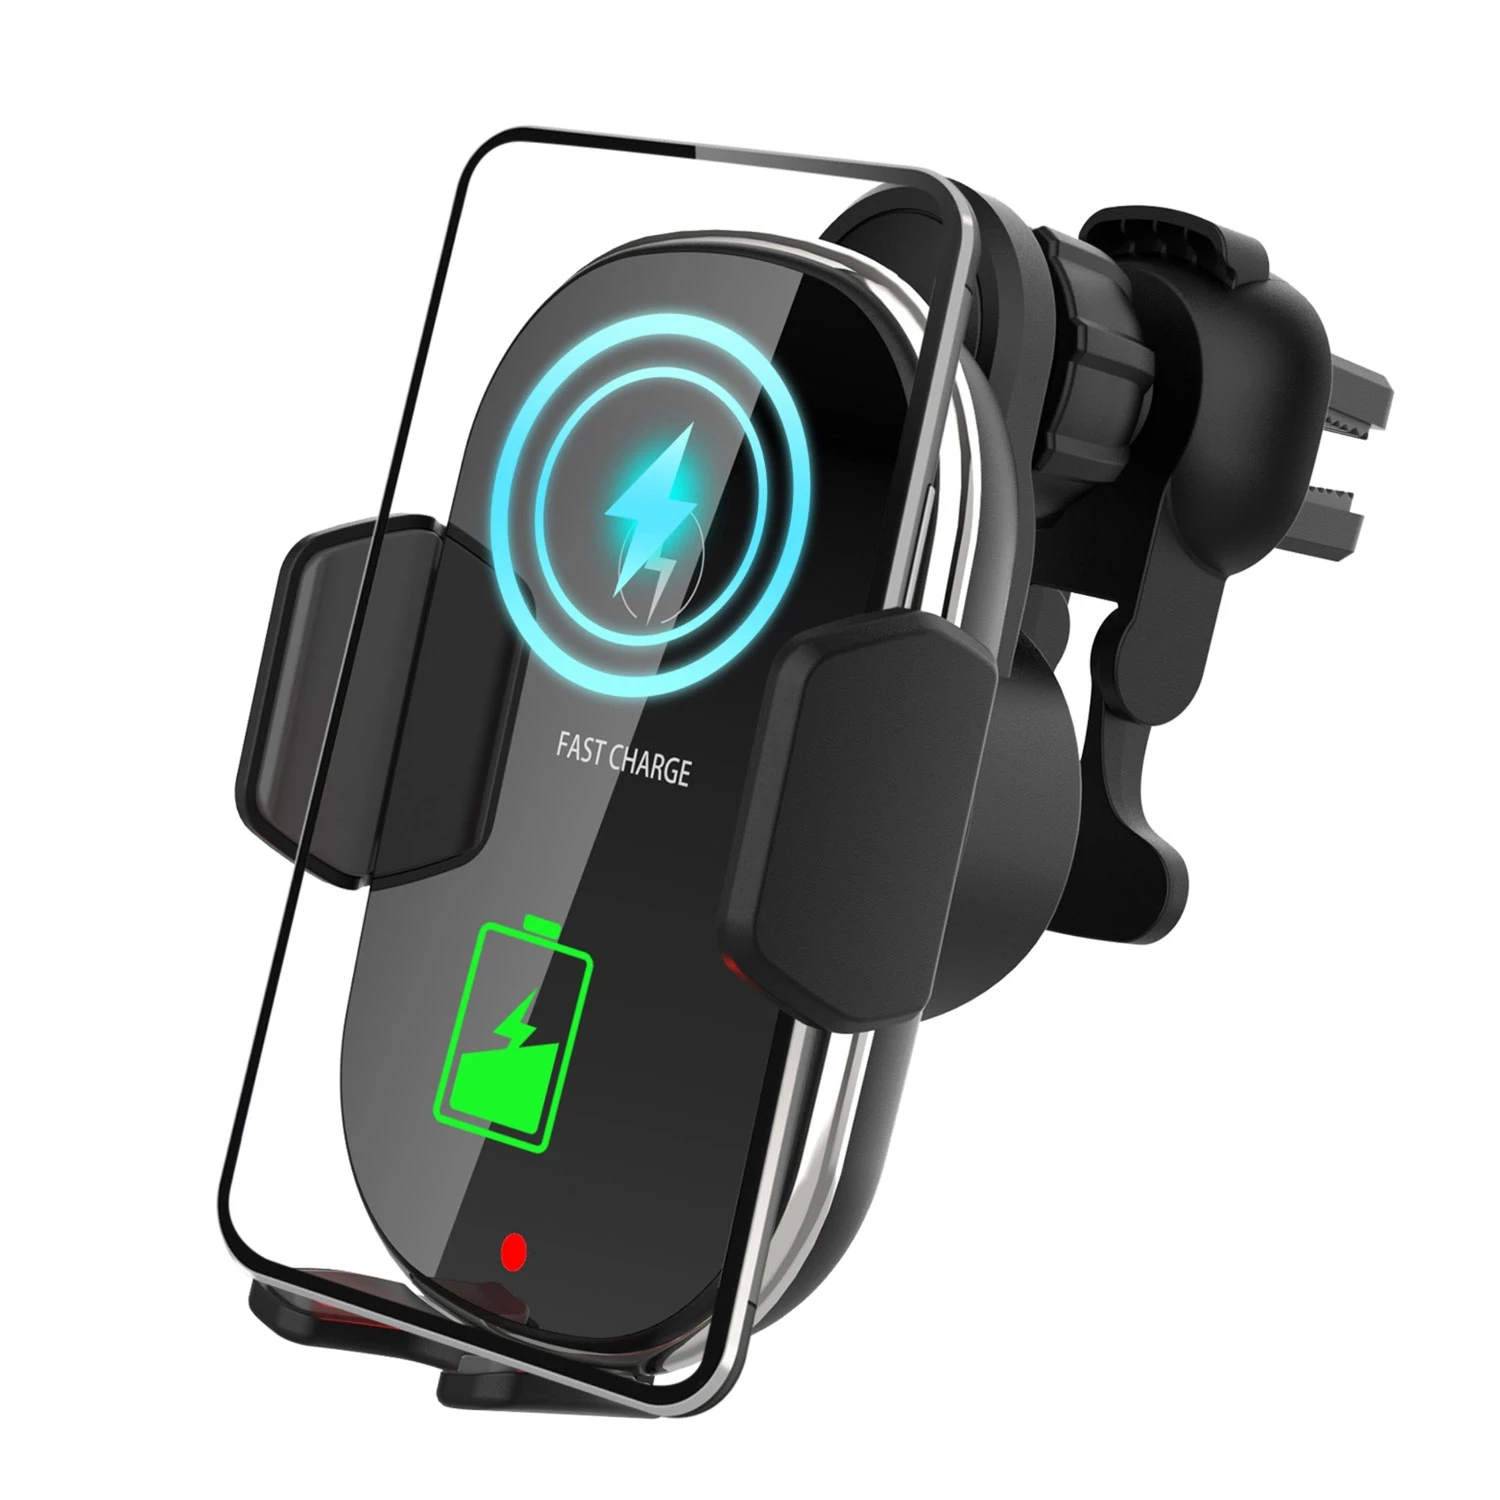 15W Fast Charge Car Wireless Phone Charger & Air Vent Mount - Fits iPhone 13/12 Pro Max